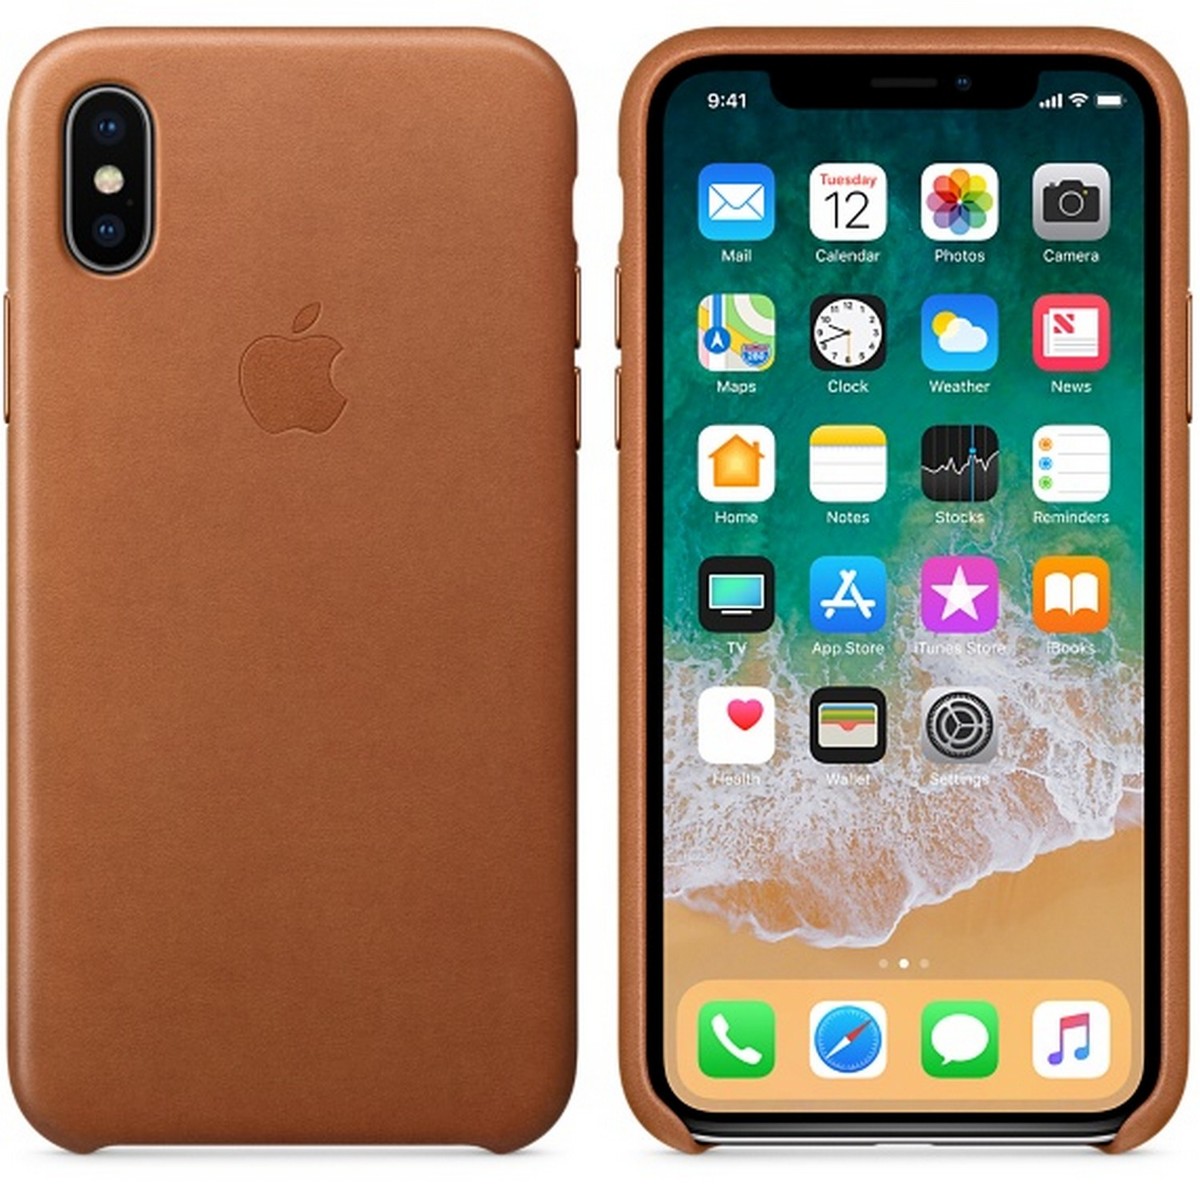 Apple iPhone X Leather  Case Saddle Brown